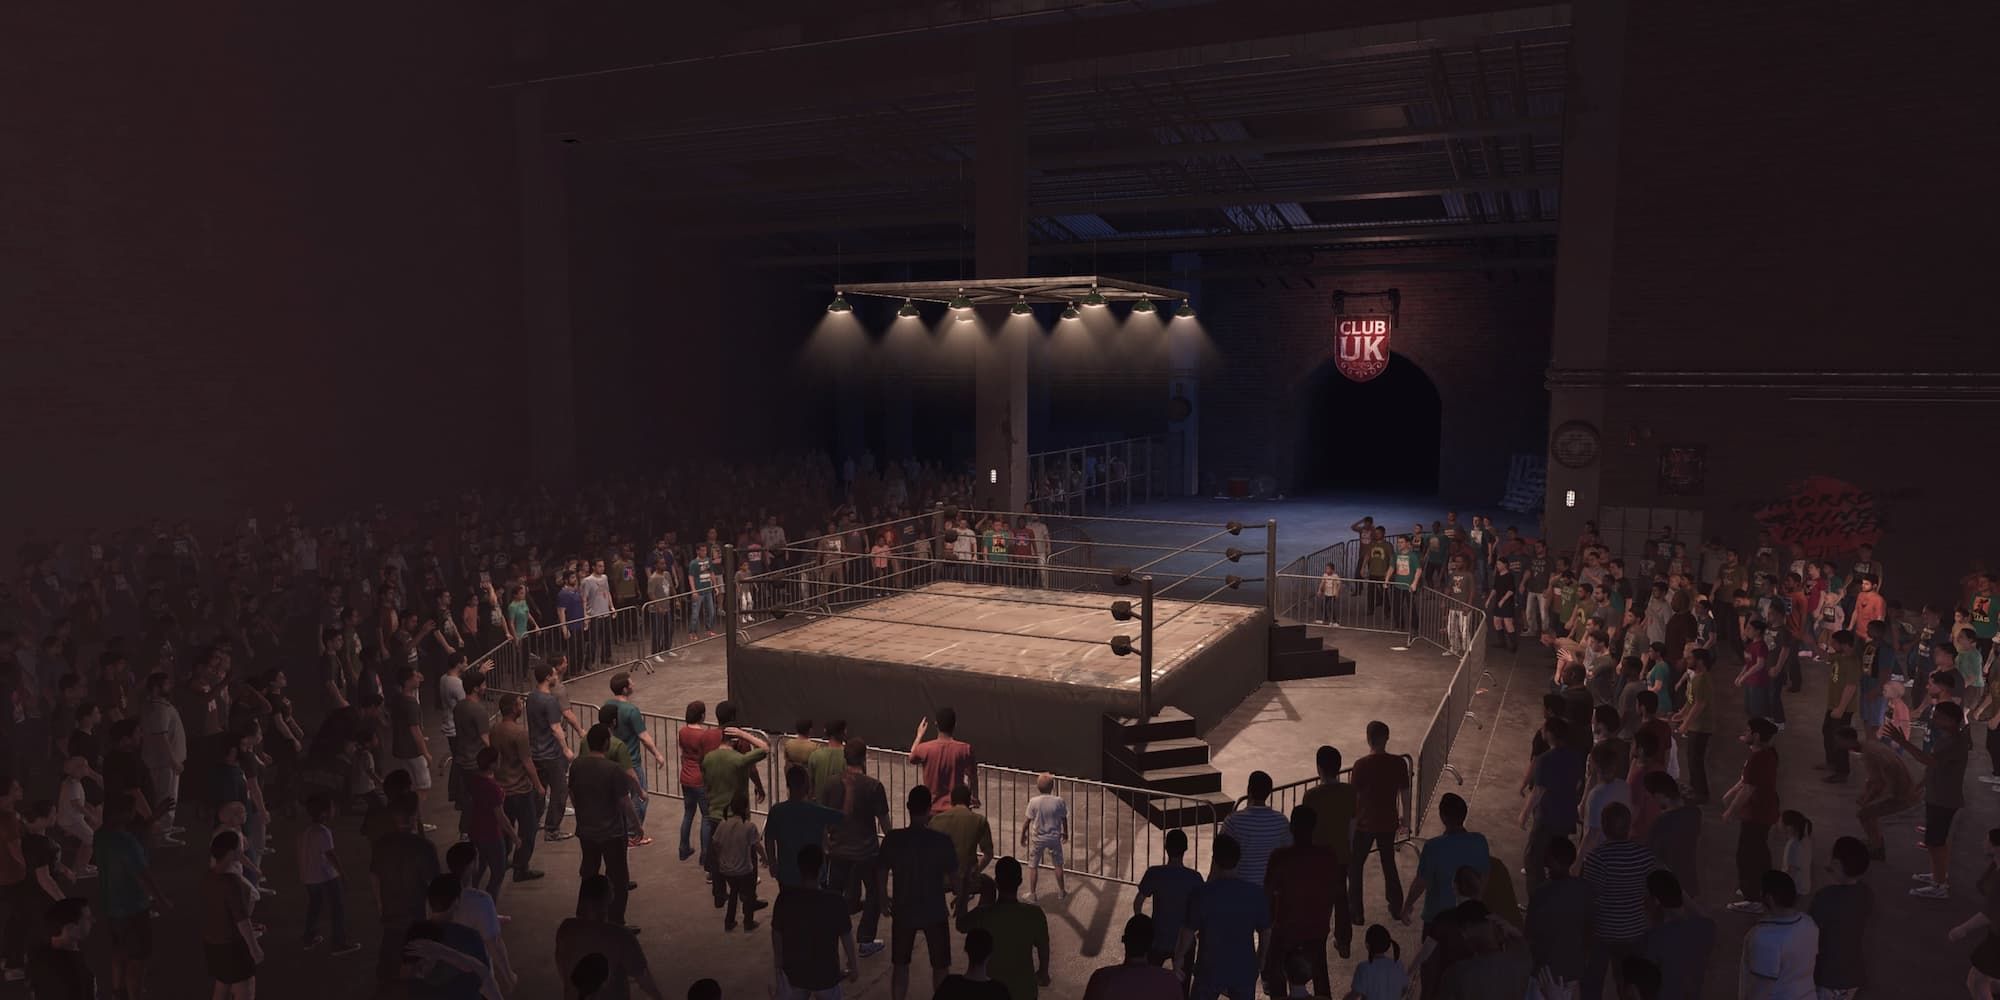 Club U.K. in WWE 2K23 is a brick building with a shaky looking light fixture above the ring.